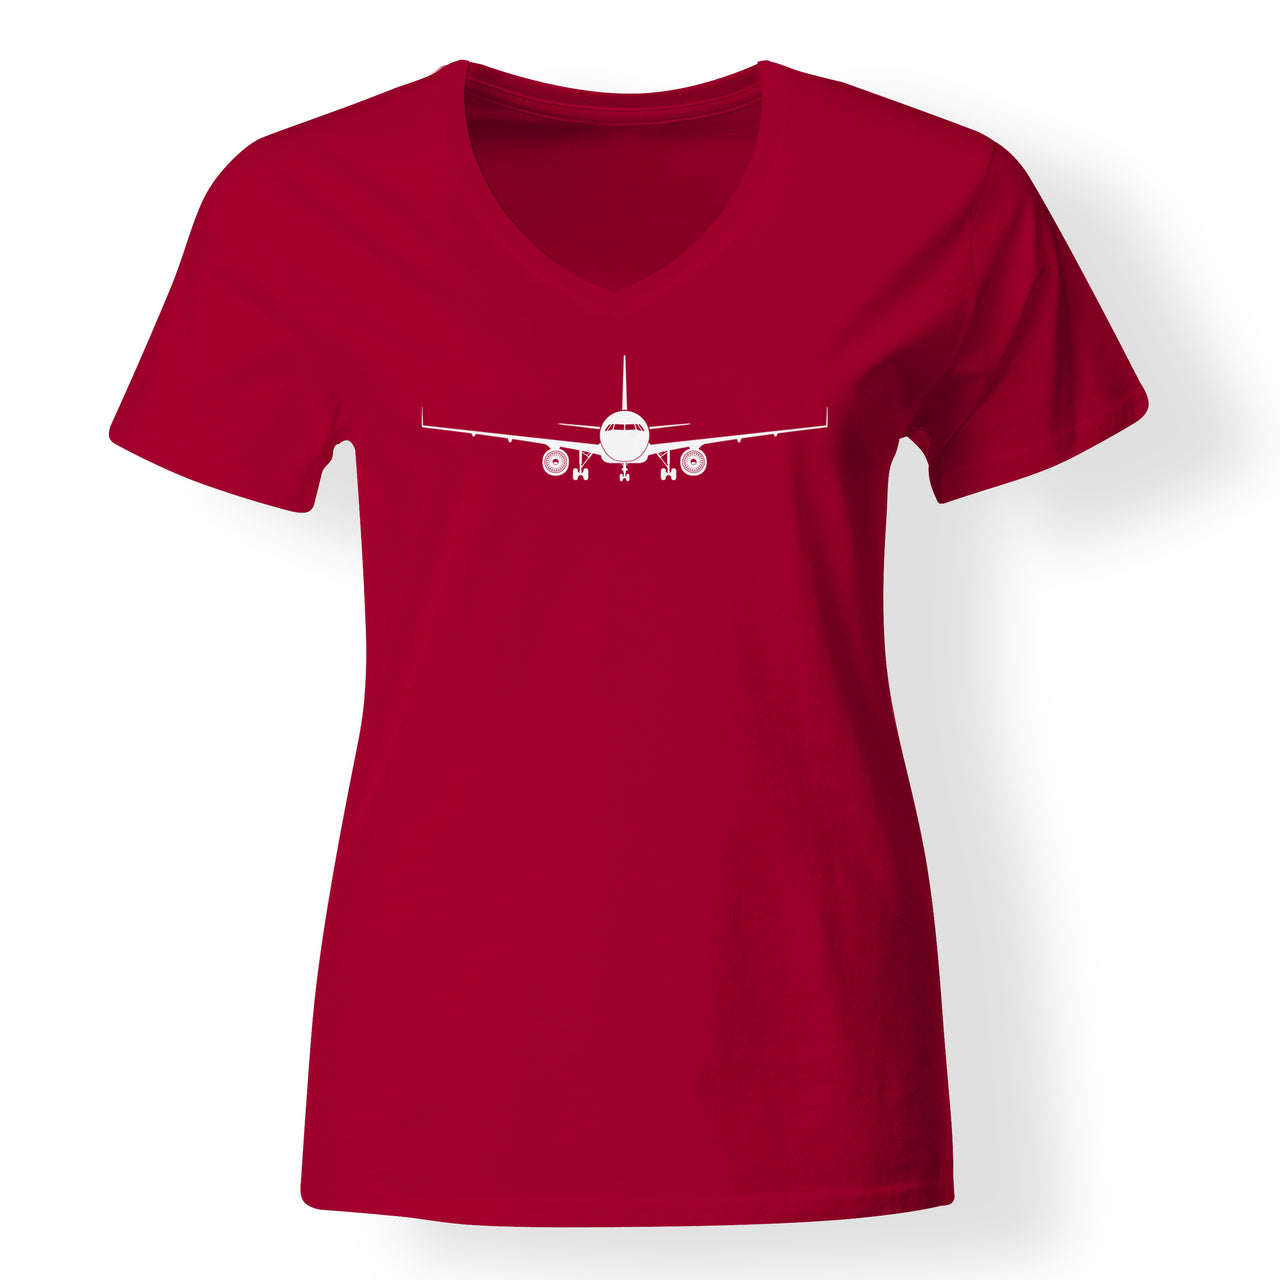 Airbus A320 Silhouette Designed V-Neck T-Shirts